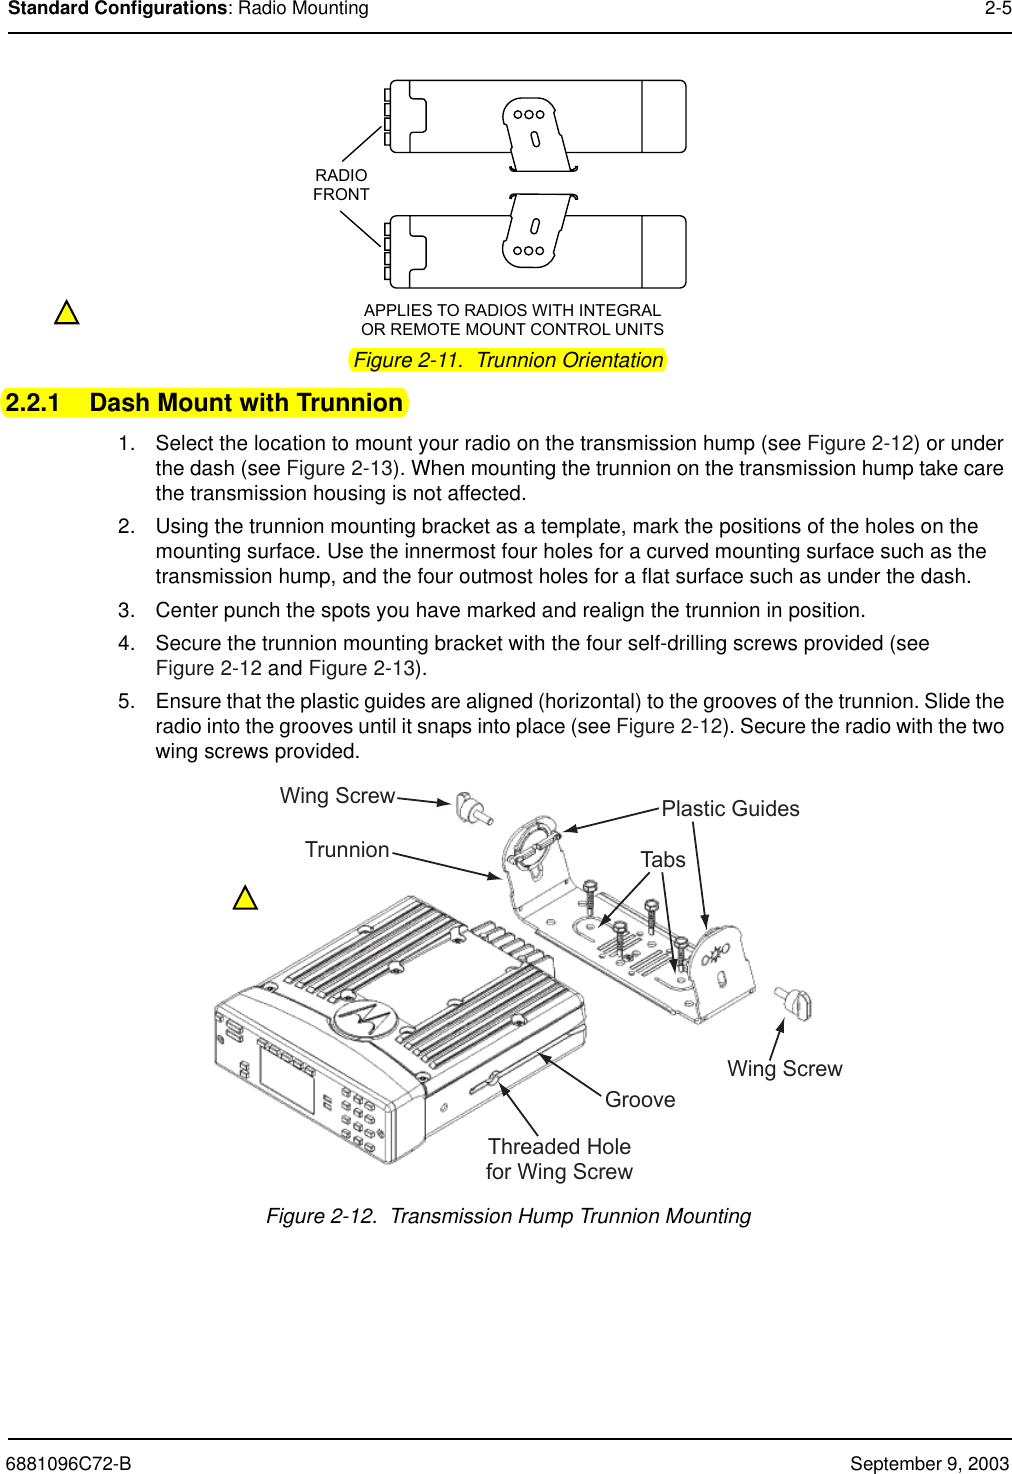 6881096C72-B September 9, 2003Standard Configurations: Radio Mounting 2-5Figure 2-11.  Trunnion Orientation2.2.1 Dash Mount with Trunnion1. Select the location to mount your radio on the transmission hump (see Figure 2-12) or under the dash (see Figure 2-13). When mounting the trunnion on the transmission hump take care the transmission housing is not affected.2. Using the trunnion mounting bracket as a template, mark the positions of the holes on the mounting surface. Use the innermost four holes for a curved mounting surface such as the transmission hump, and the four outmost holes for a flat surface such as under the dash.3. Center punch the spots you have marked and realign the trunnion in position.4. Secure the trunnion mounting bracket with the four self-drilling screws provided (see Figure 2-12 and Figure 2-13).5. Ensure that the plastic guides are aligned (horizontal) to the grooves of the trunnion. Slide the radio into the grooves until it snaps into place (see Figure 2-12). Secure the radio with the two wing screws provided.Figure 2-12.  Transmission Hump Trunnion MountingRADIOFRONTAPPLIES TO RADIOS WITH INTEGRALOR REMOTE MOUNT CONTROL UNITSTabsTrunnionGrooveWing ScrewWing Screw Plastic GuidesThreaded Holefor Wing Screw